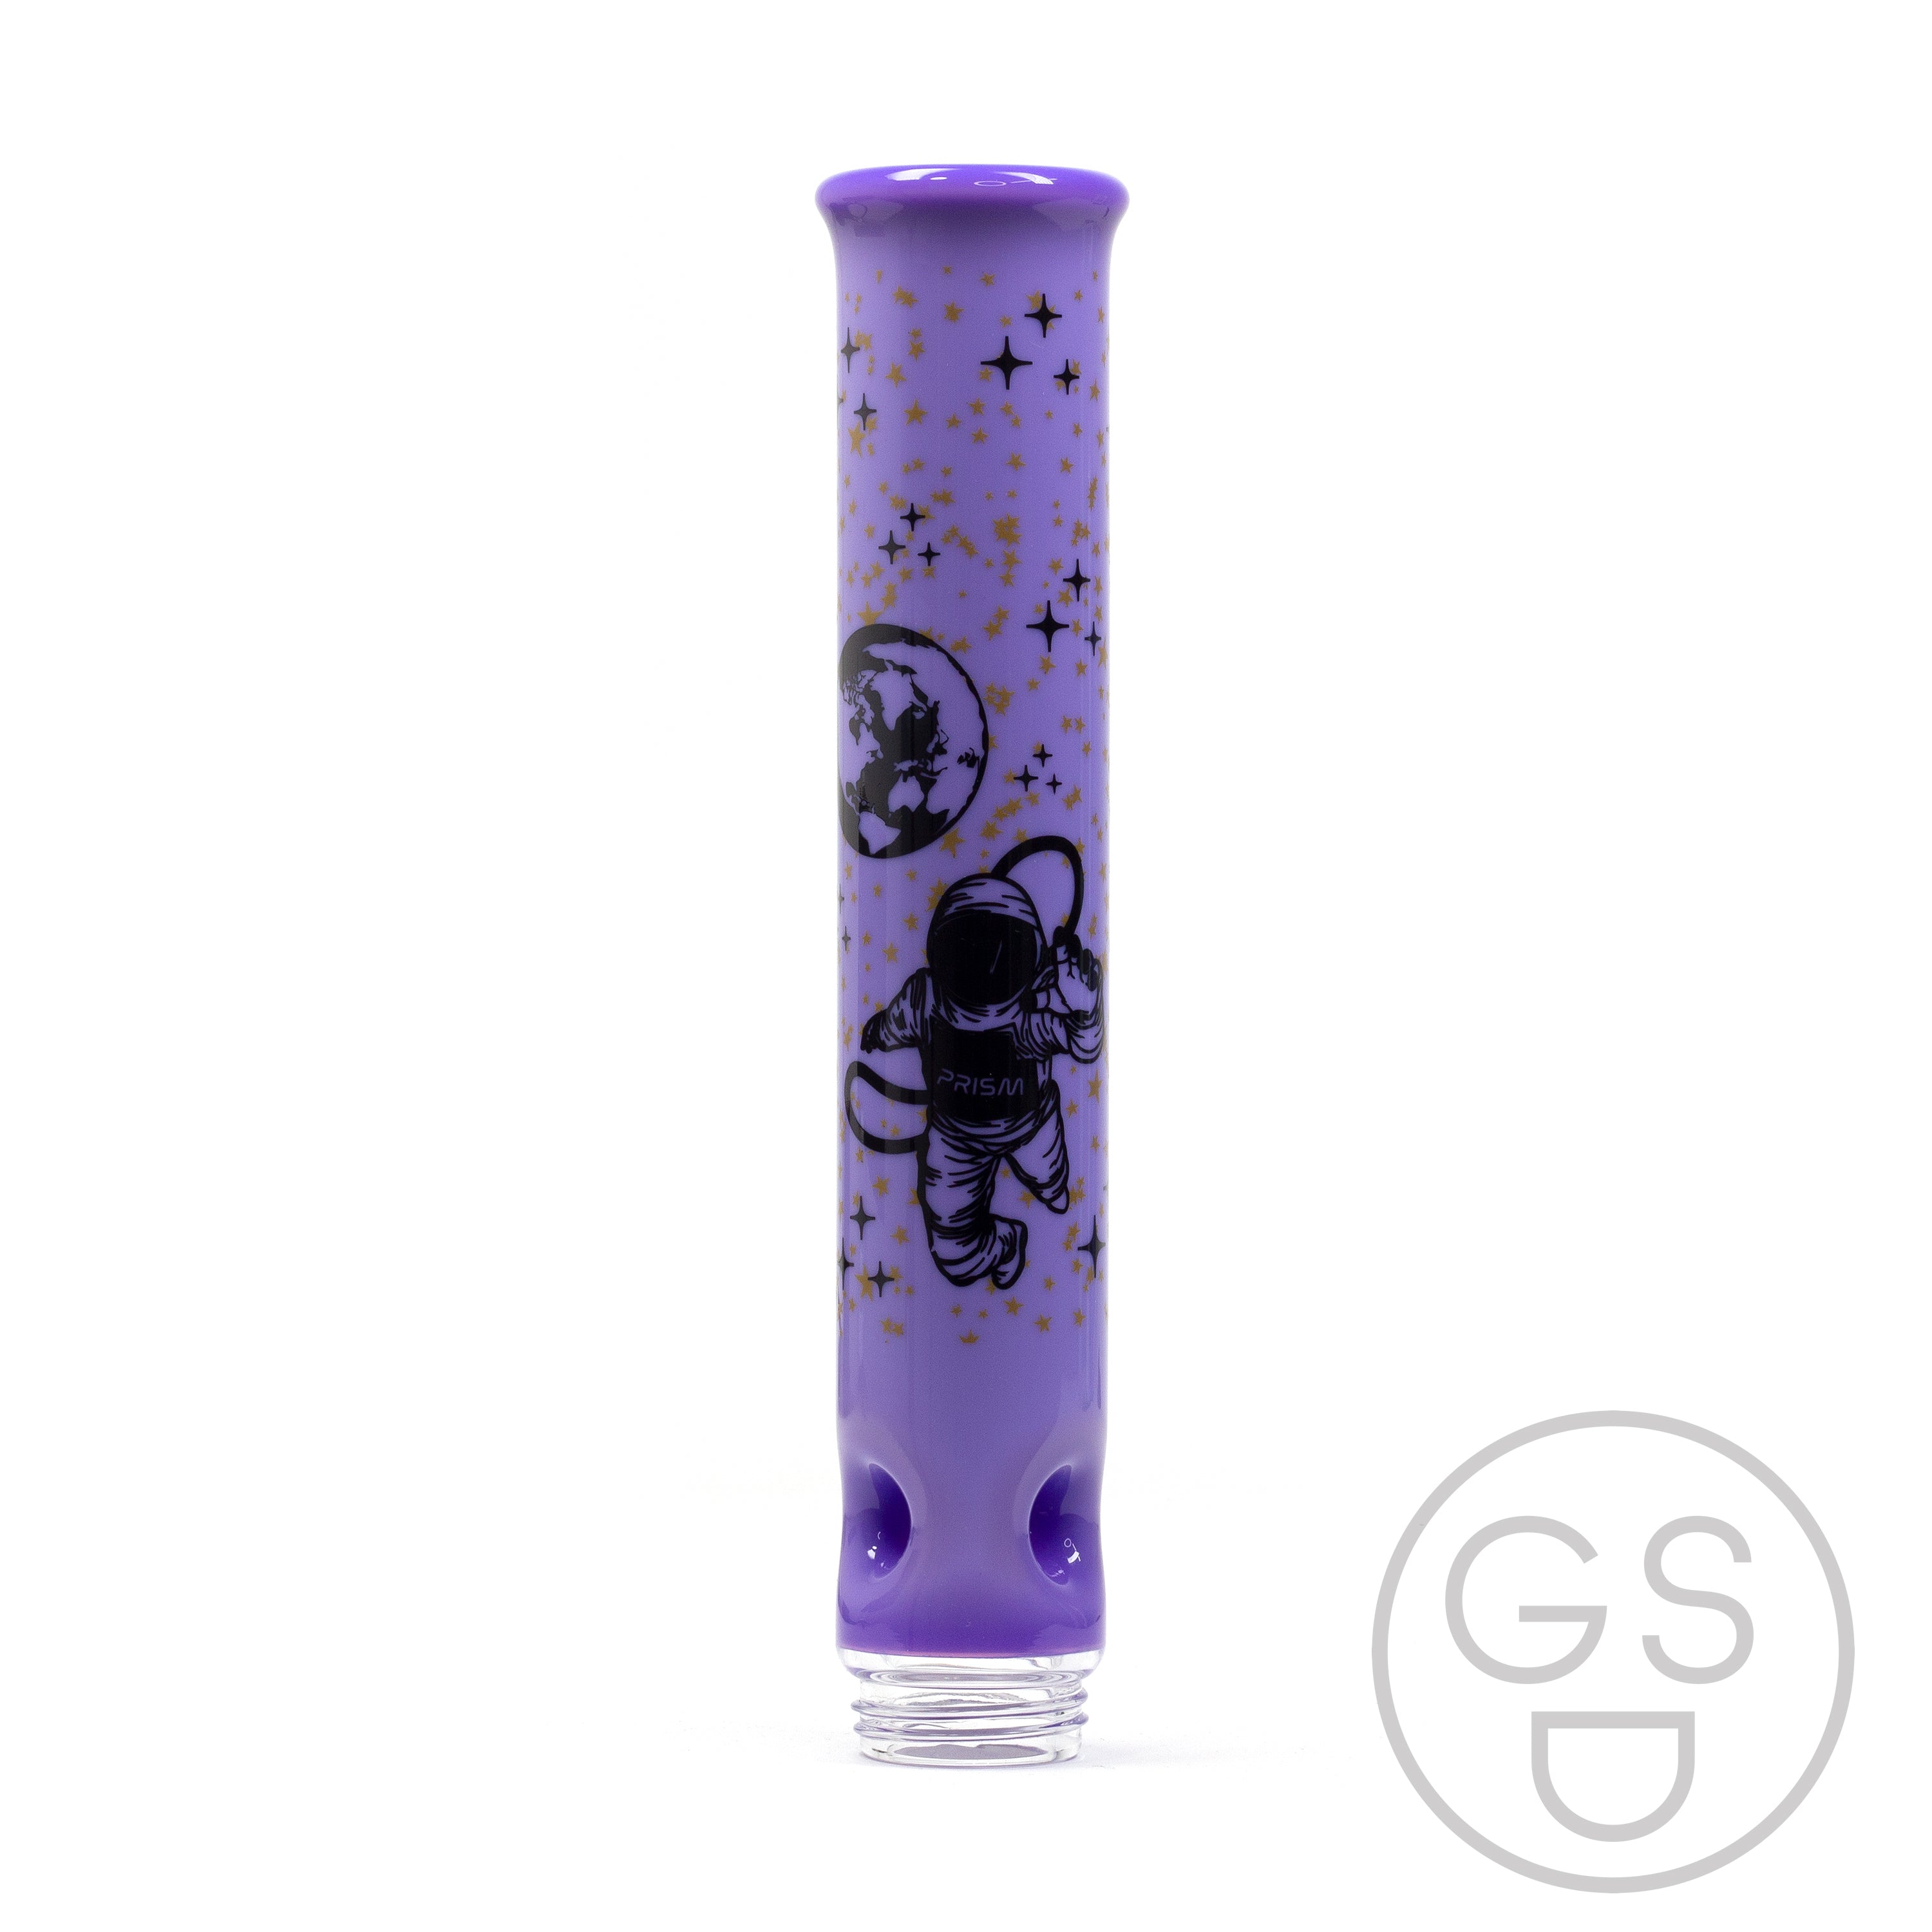 Prism Modular Waterpipe Tall Mouthpiece - Spaced Out / Grape Taffy